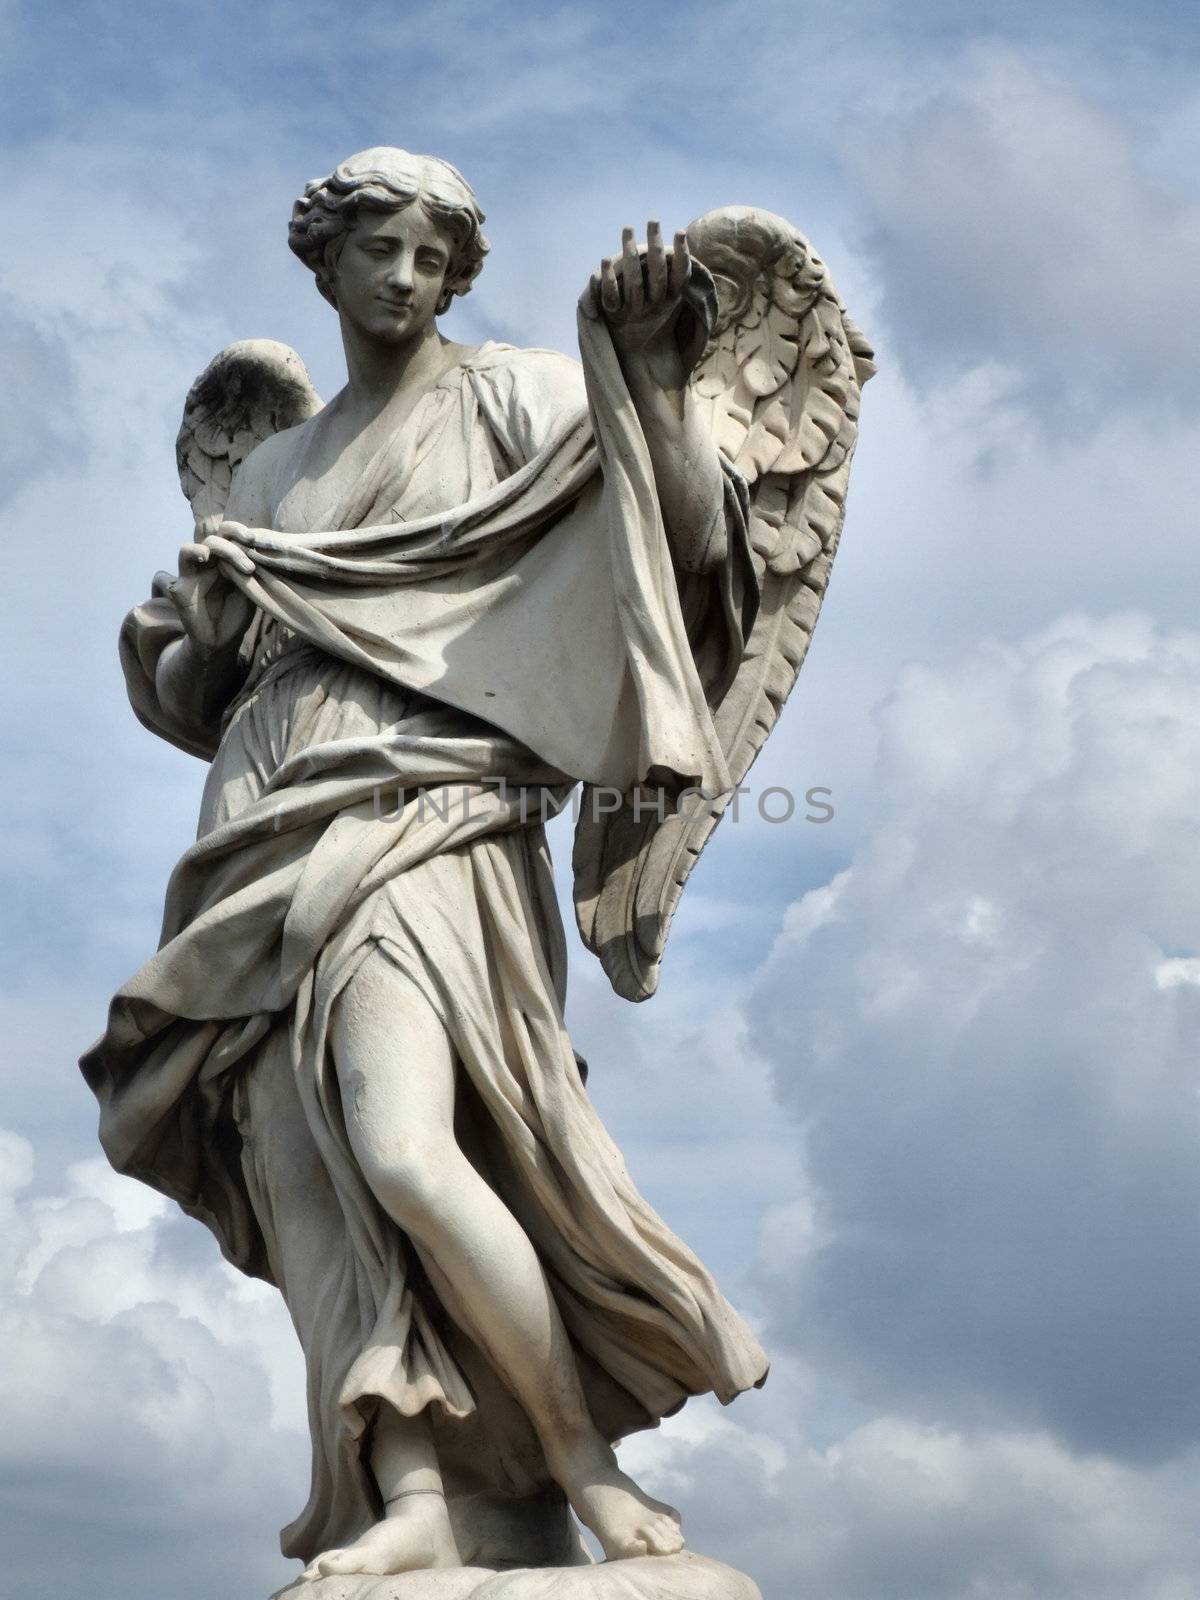 Angel statue in Rome, Italy by tupungato